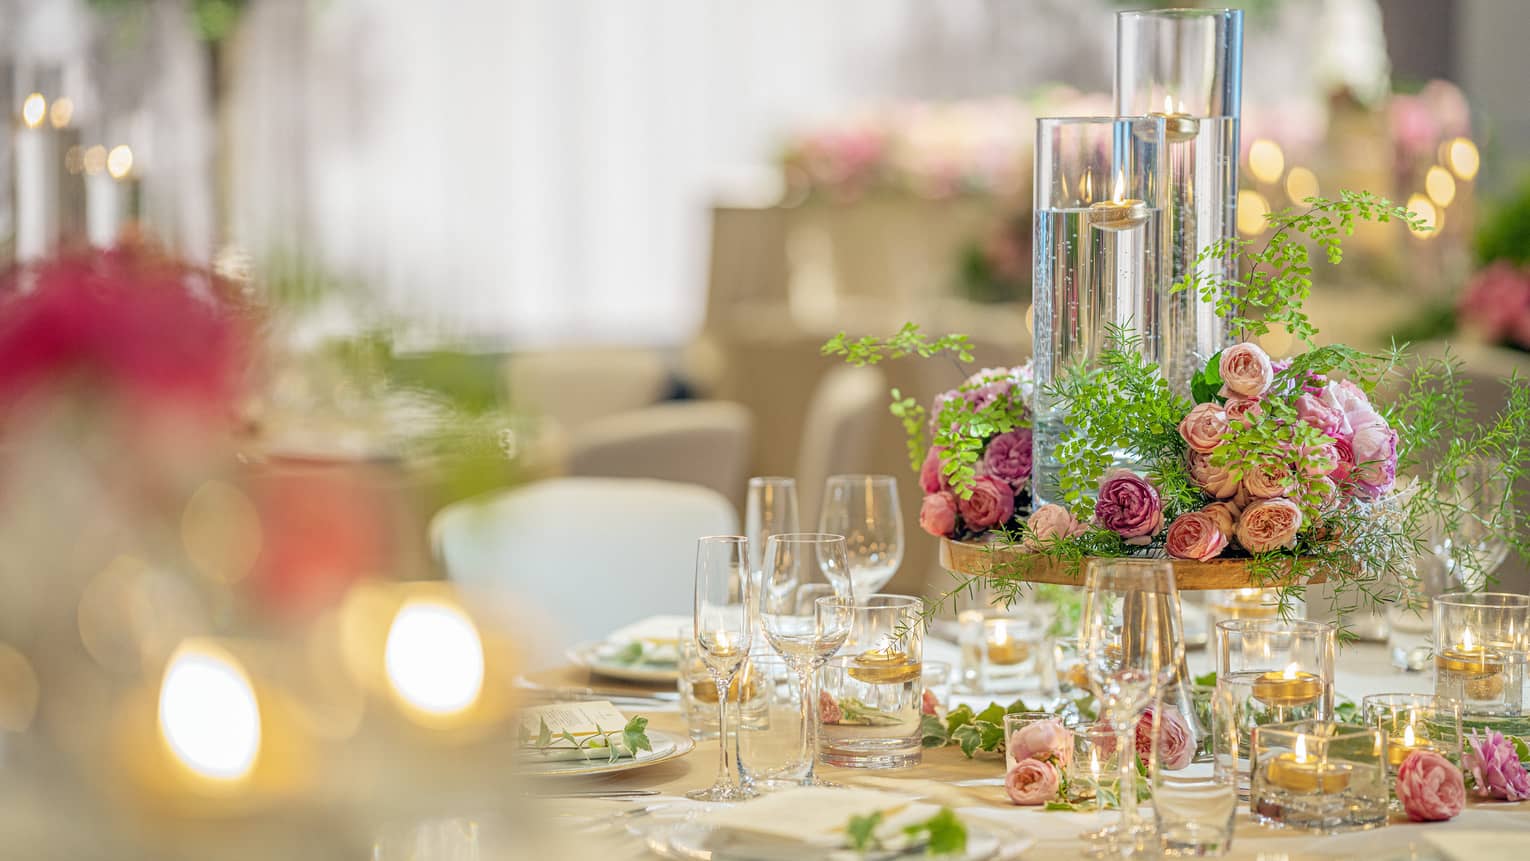 Closeup of table in ballroom with gold accents and pink floral centrepiece